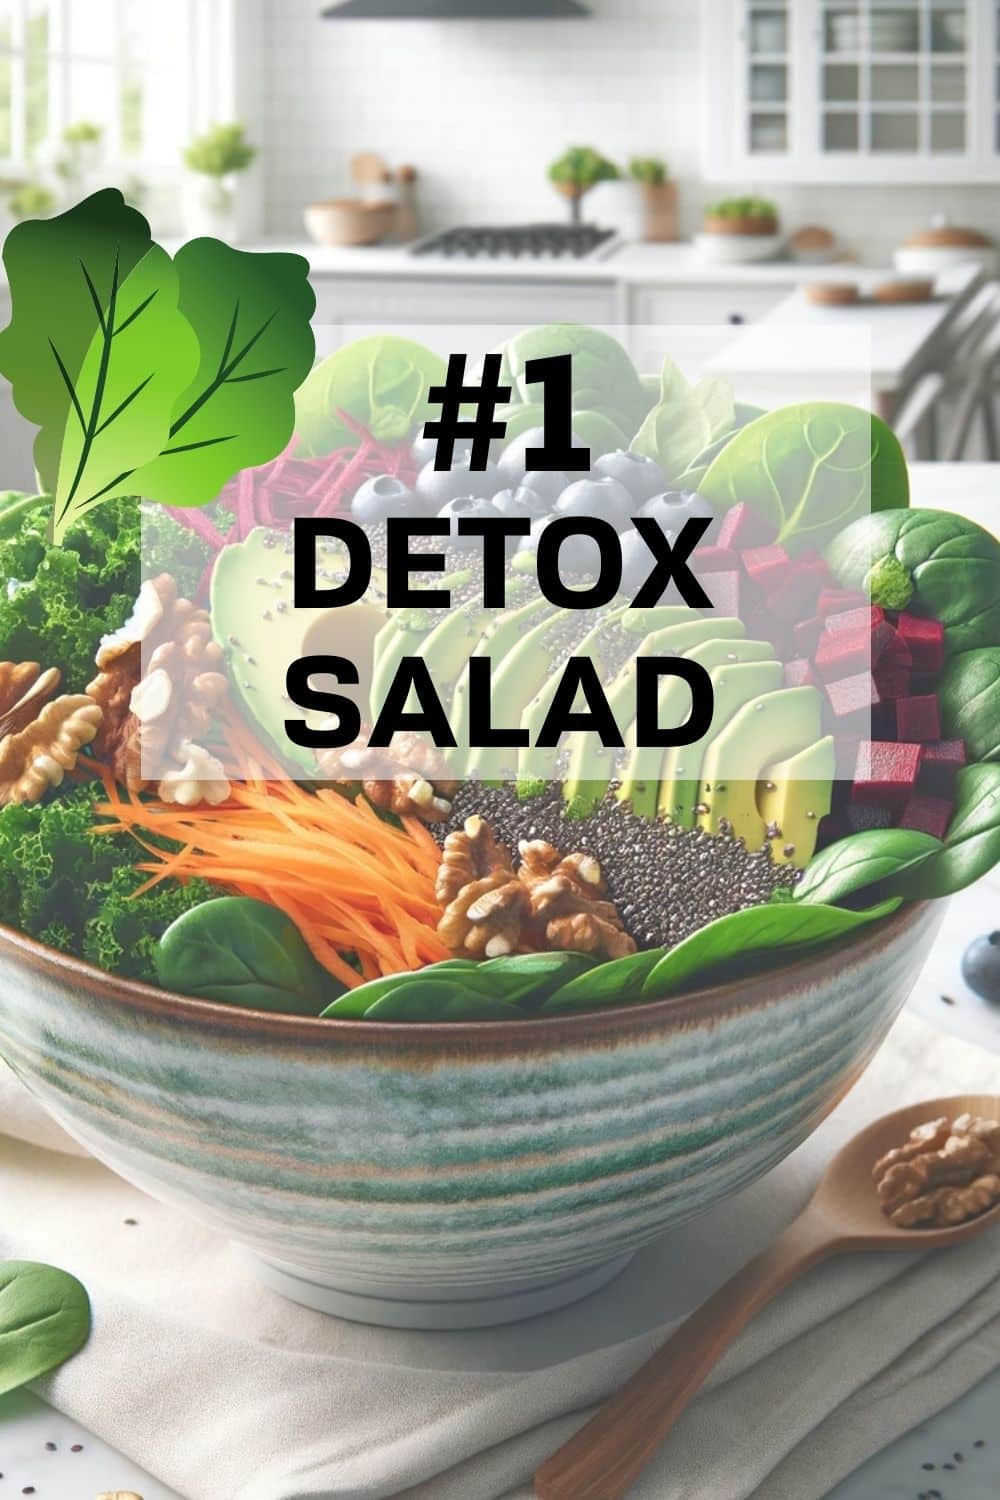 perfectly plated detox salad for January and getting healthier